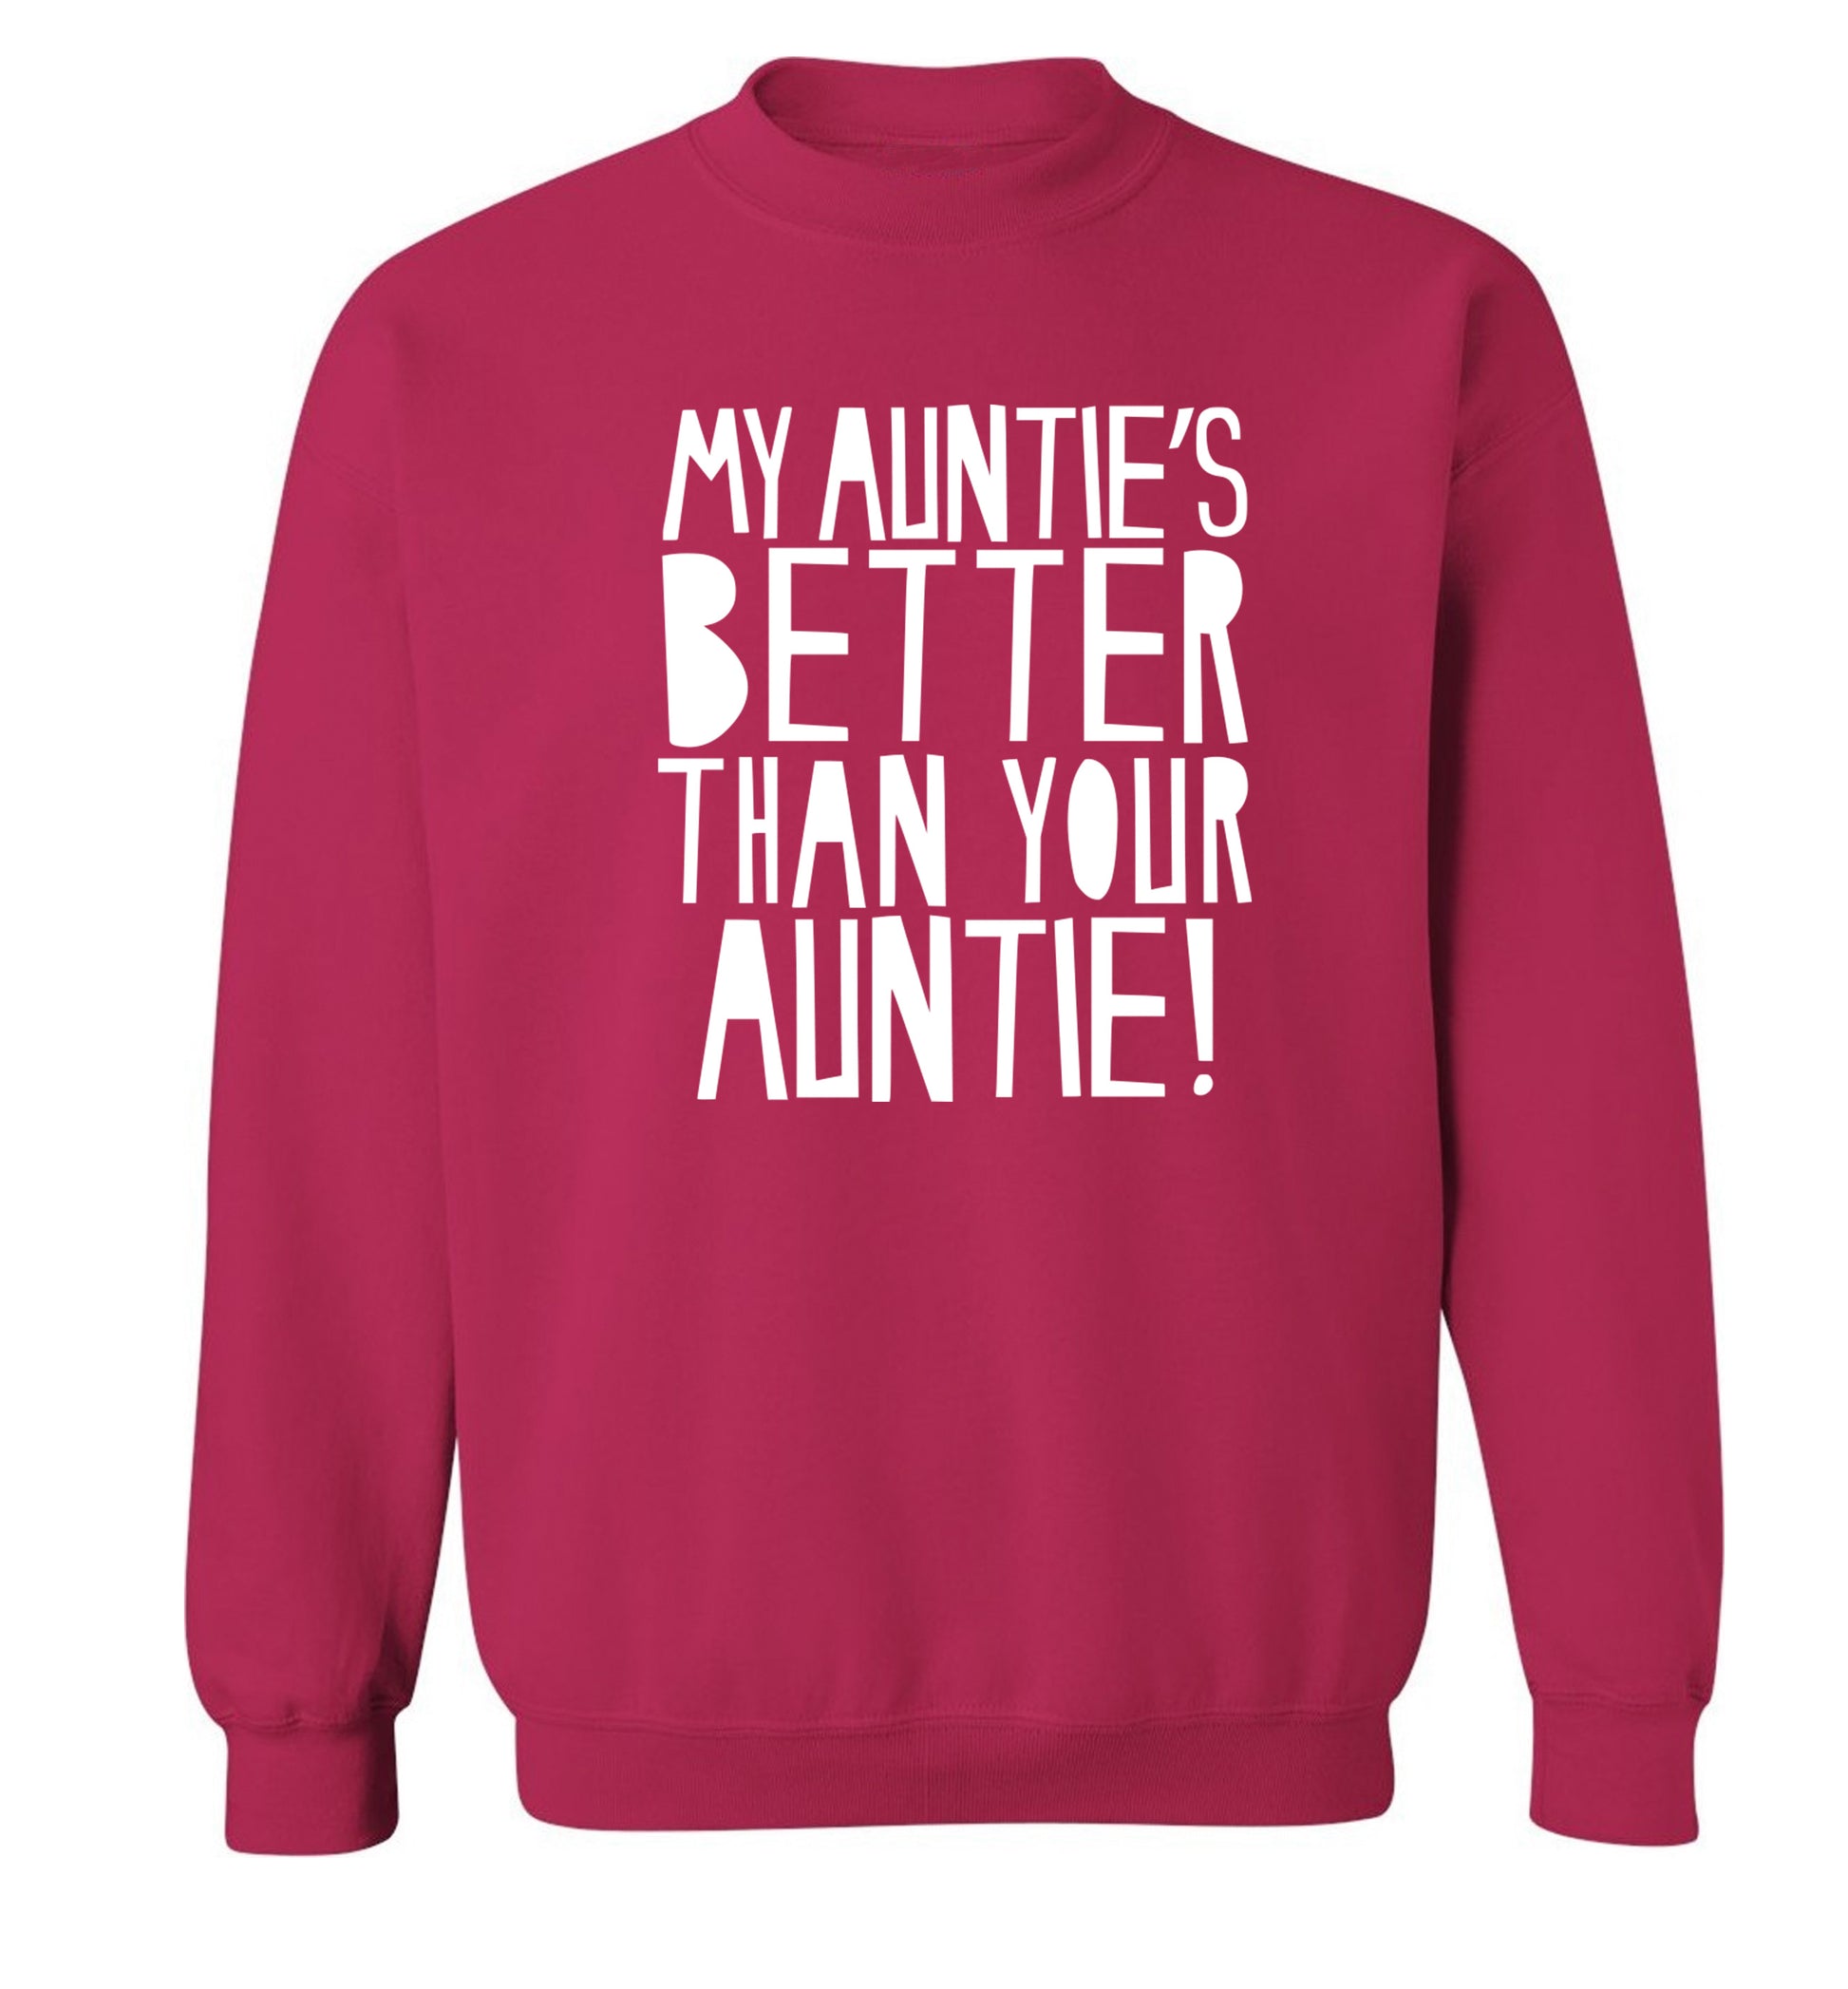 My auntie's better than your auntie Adult's unisex pink Sweater 2XL